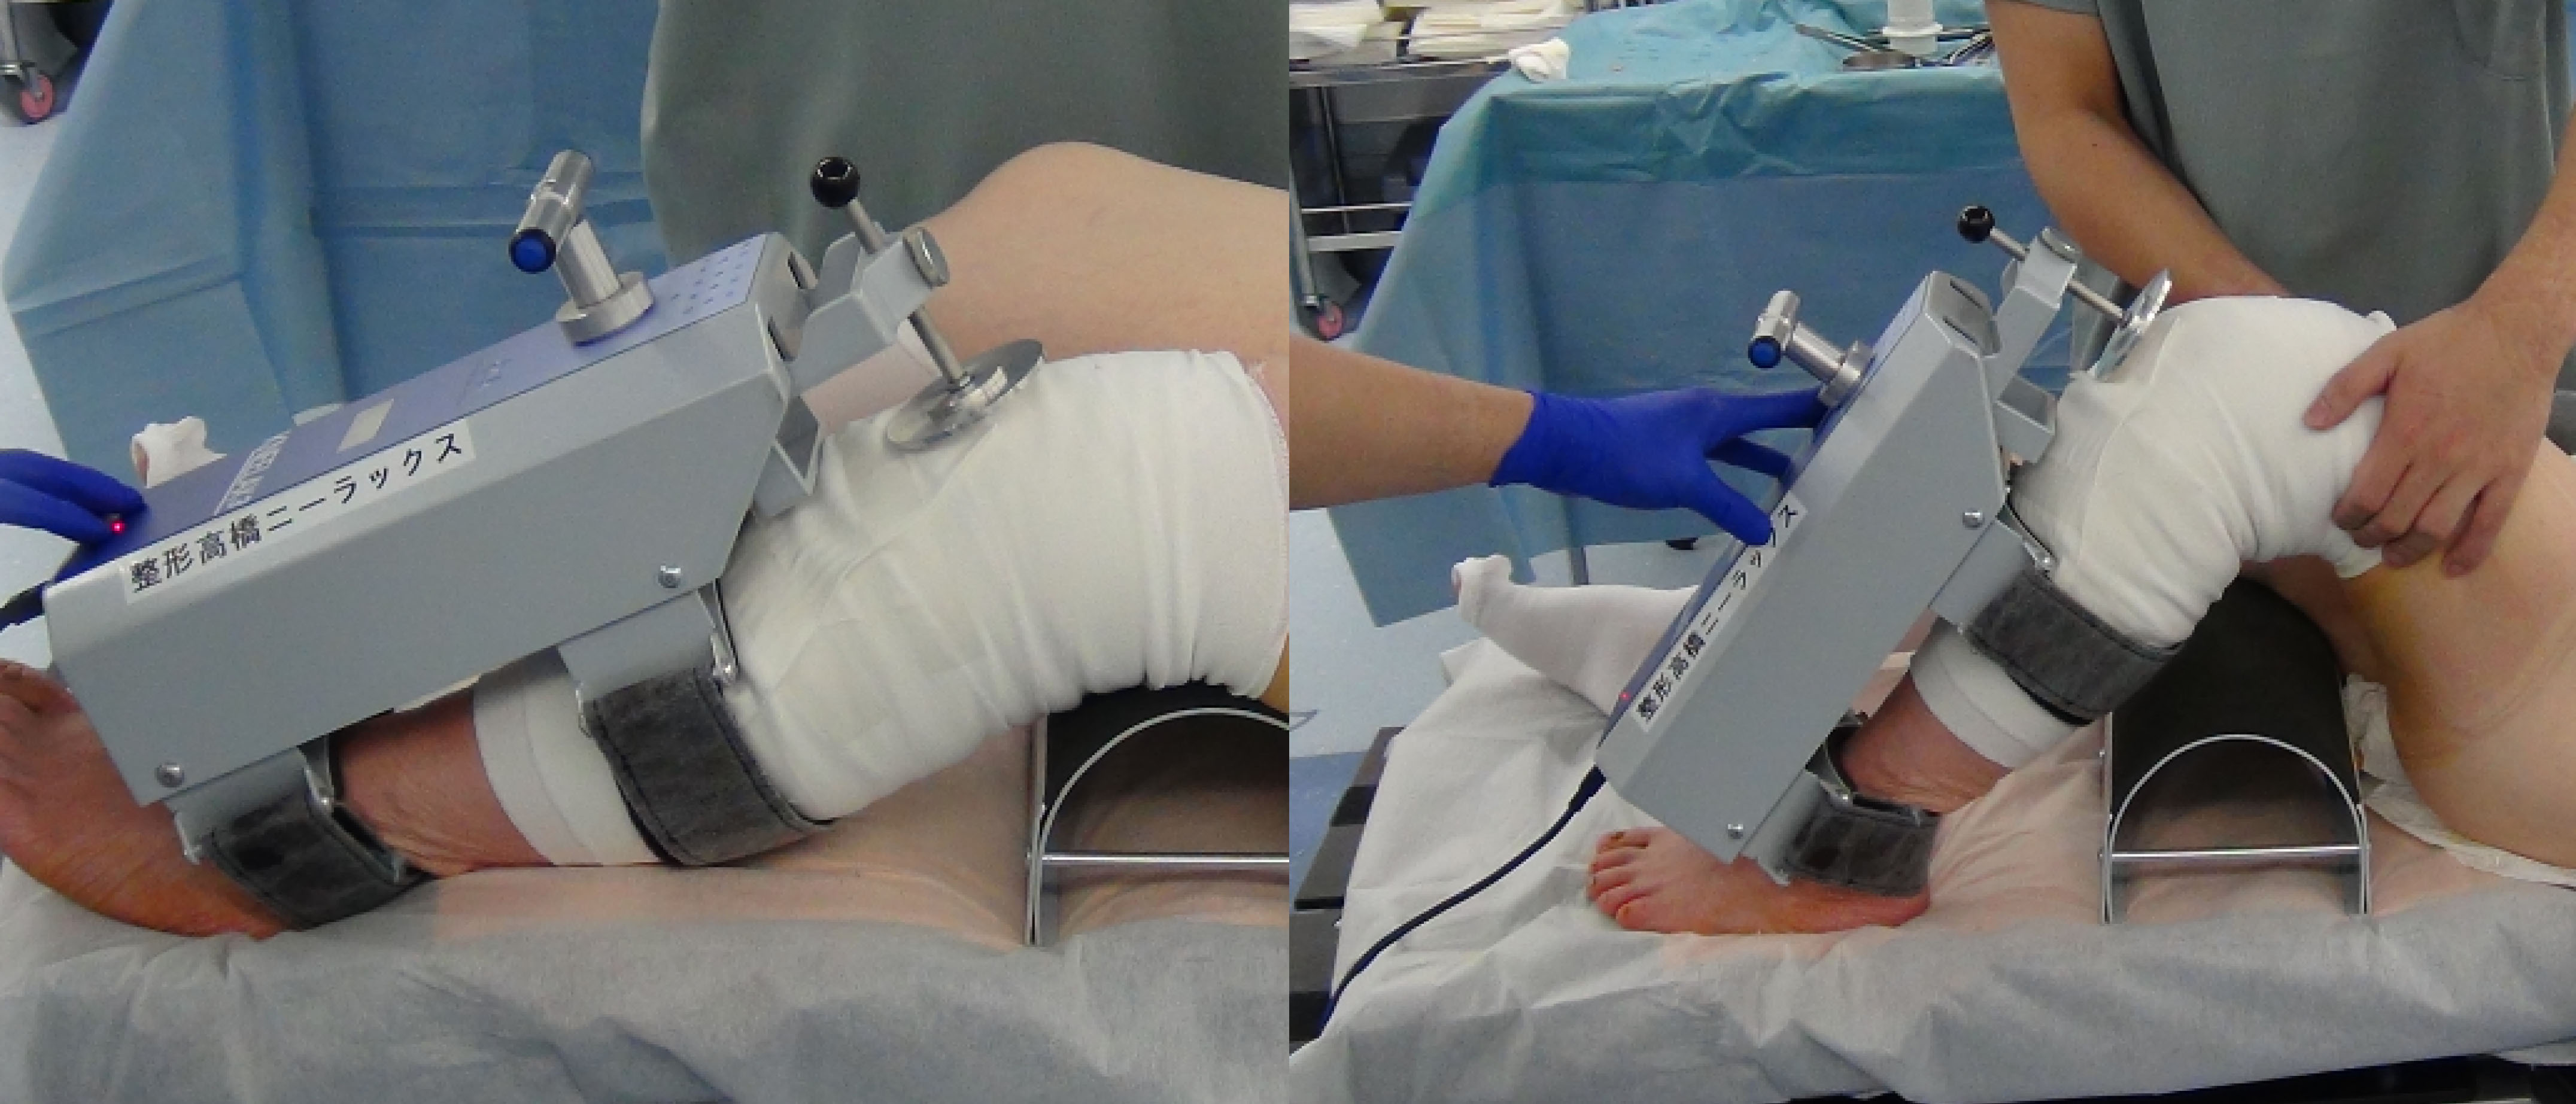 Postoperative knee AP laxity measurements made by using a Kneelax 3 arthrometer at 30∘ and 90∘ of knee flexion.